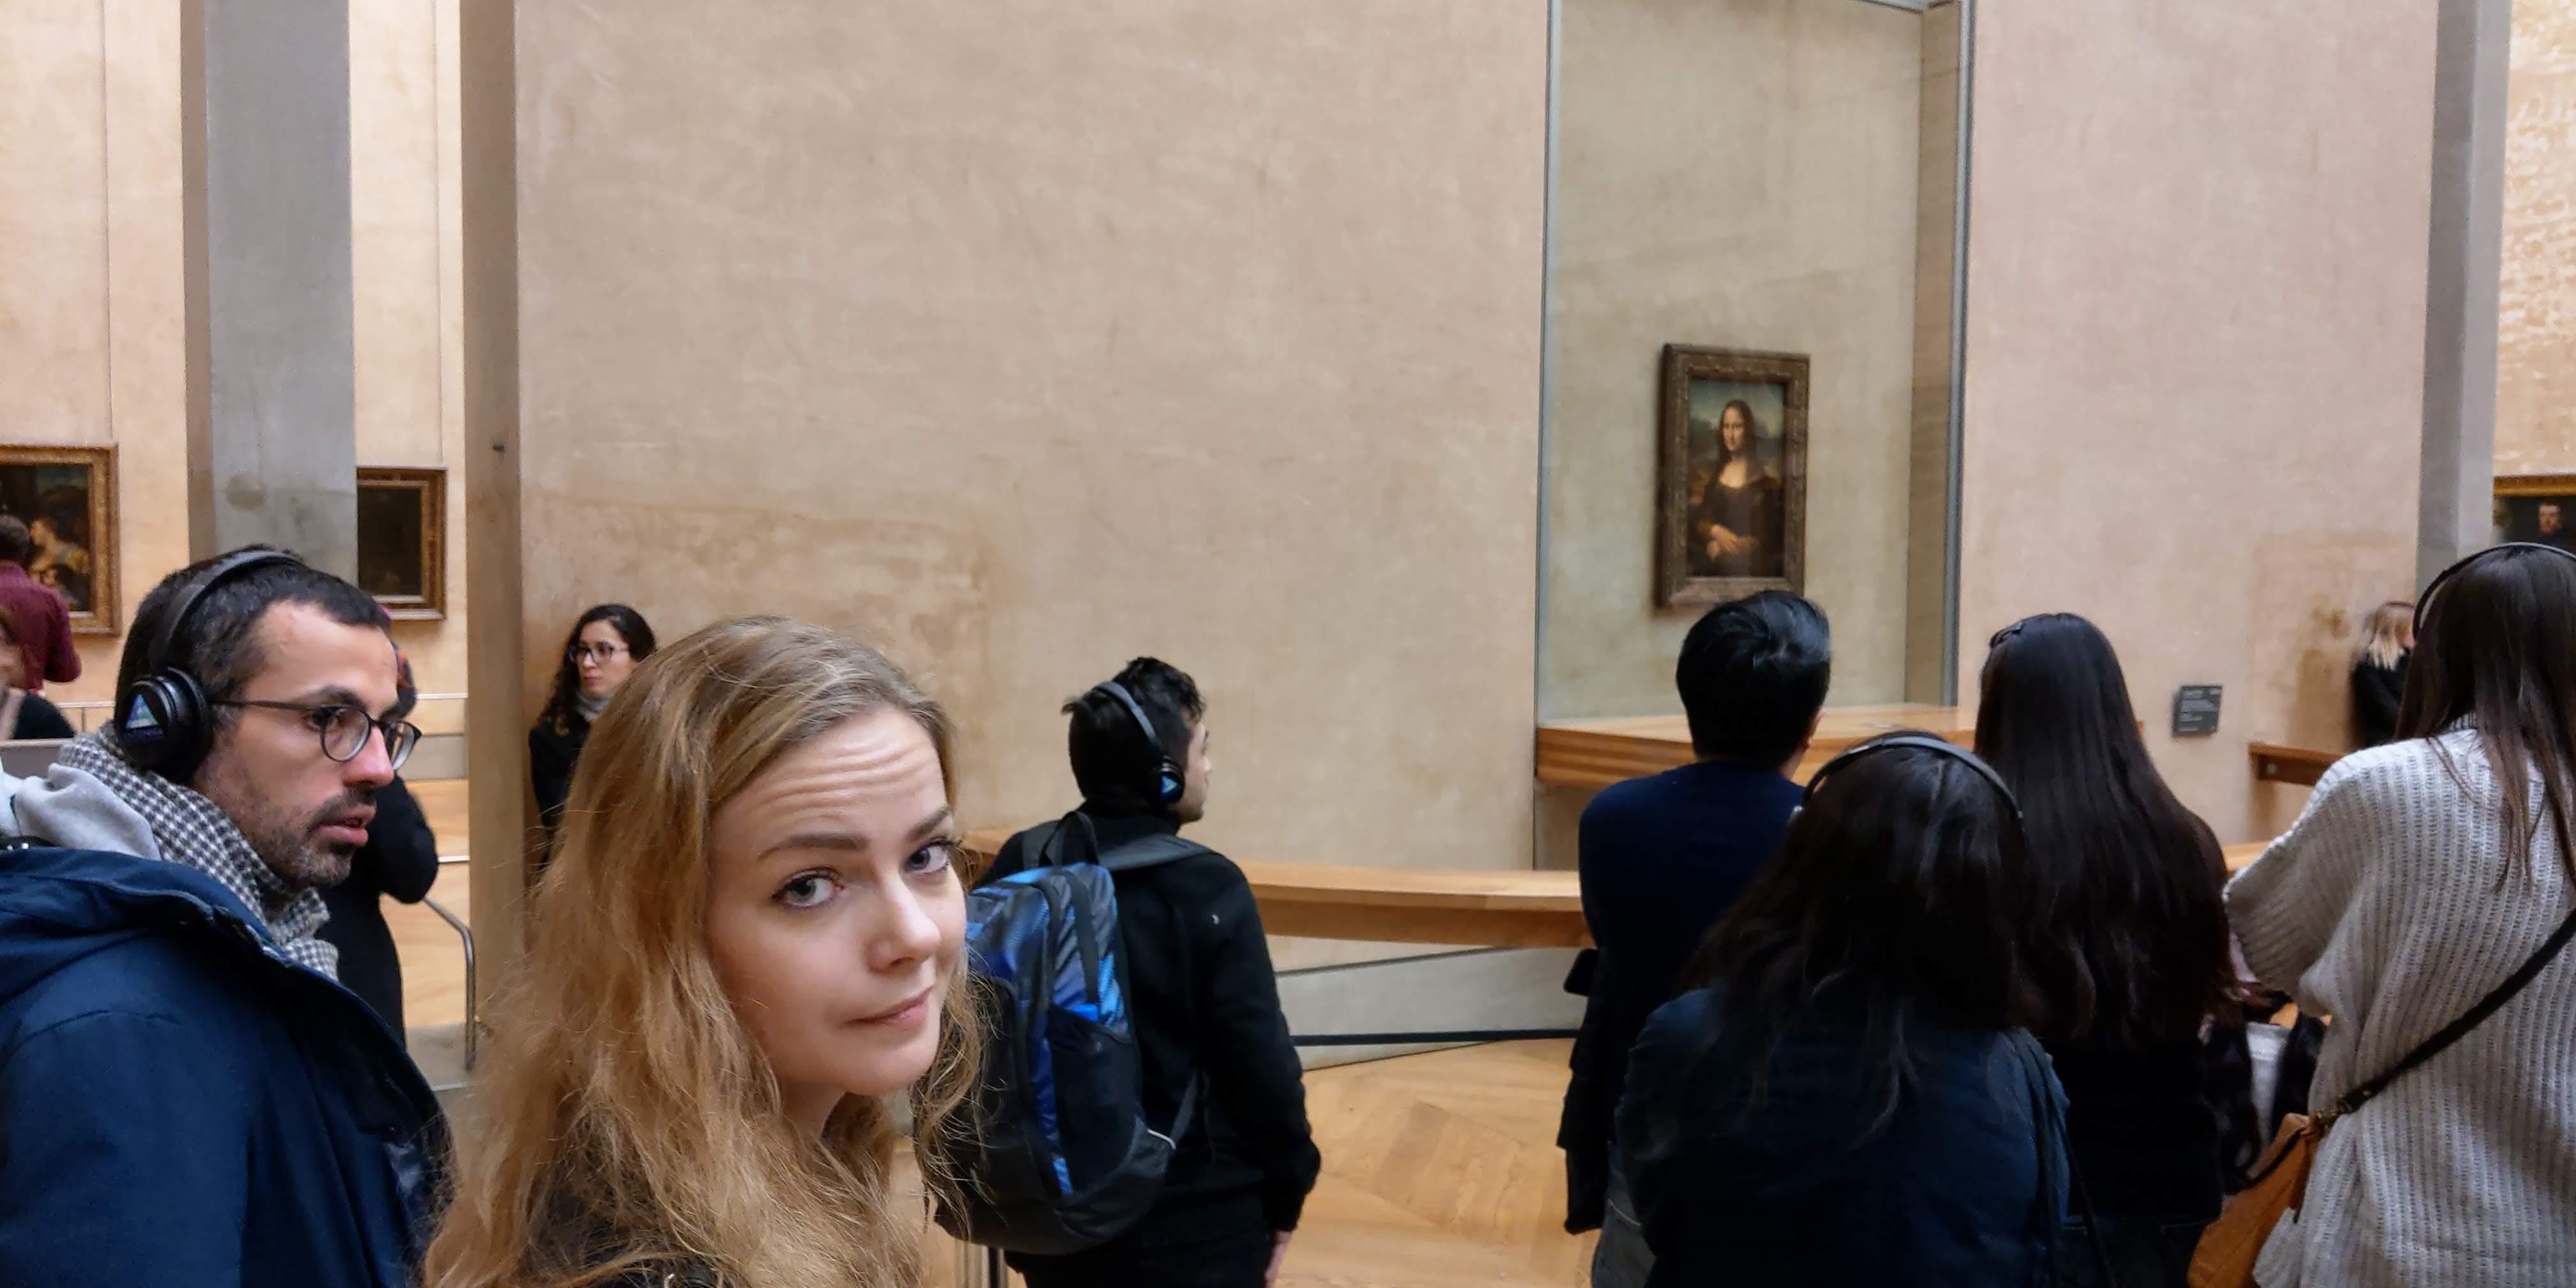 My wife was not impressed with the Mona Lisa.jpg